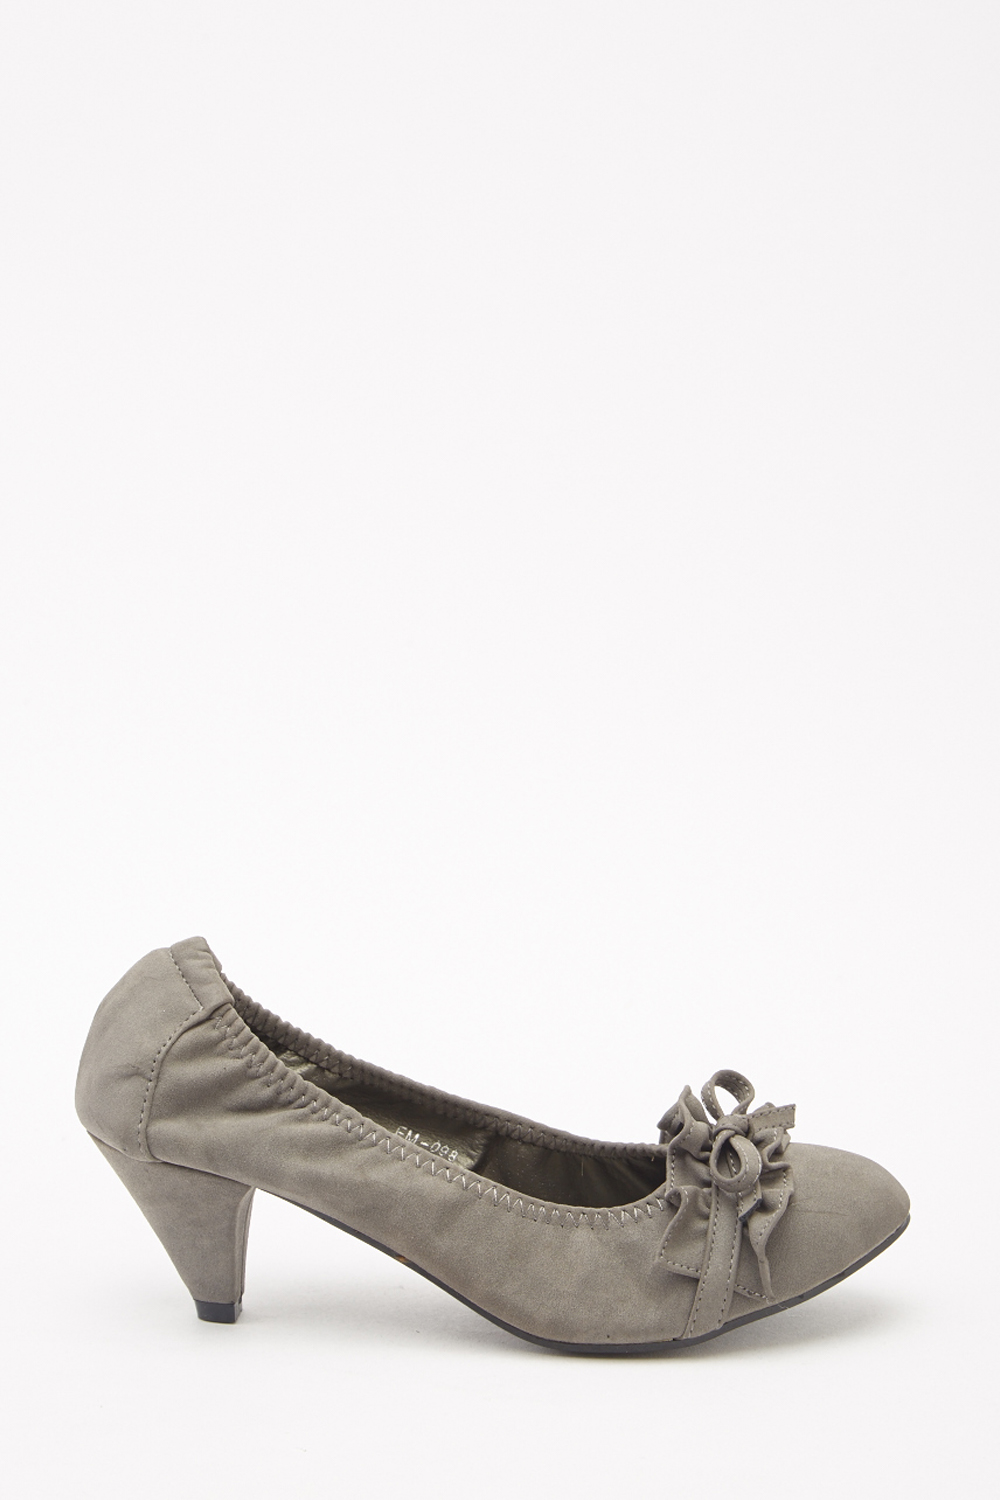 Cone Heel Ruched Pumps - 3 Colours - Just £5